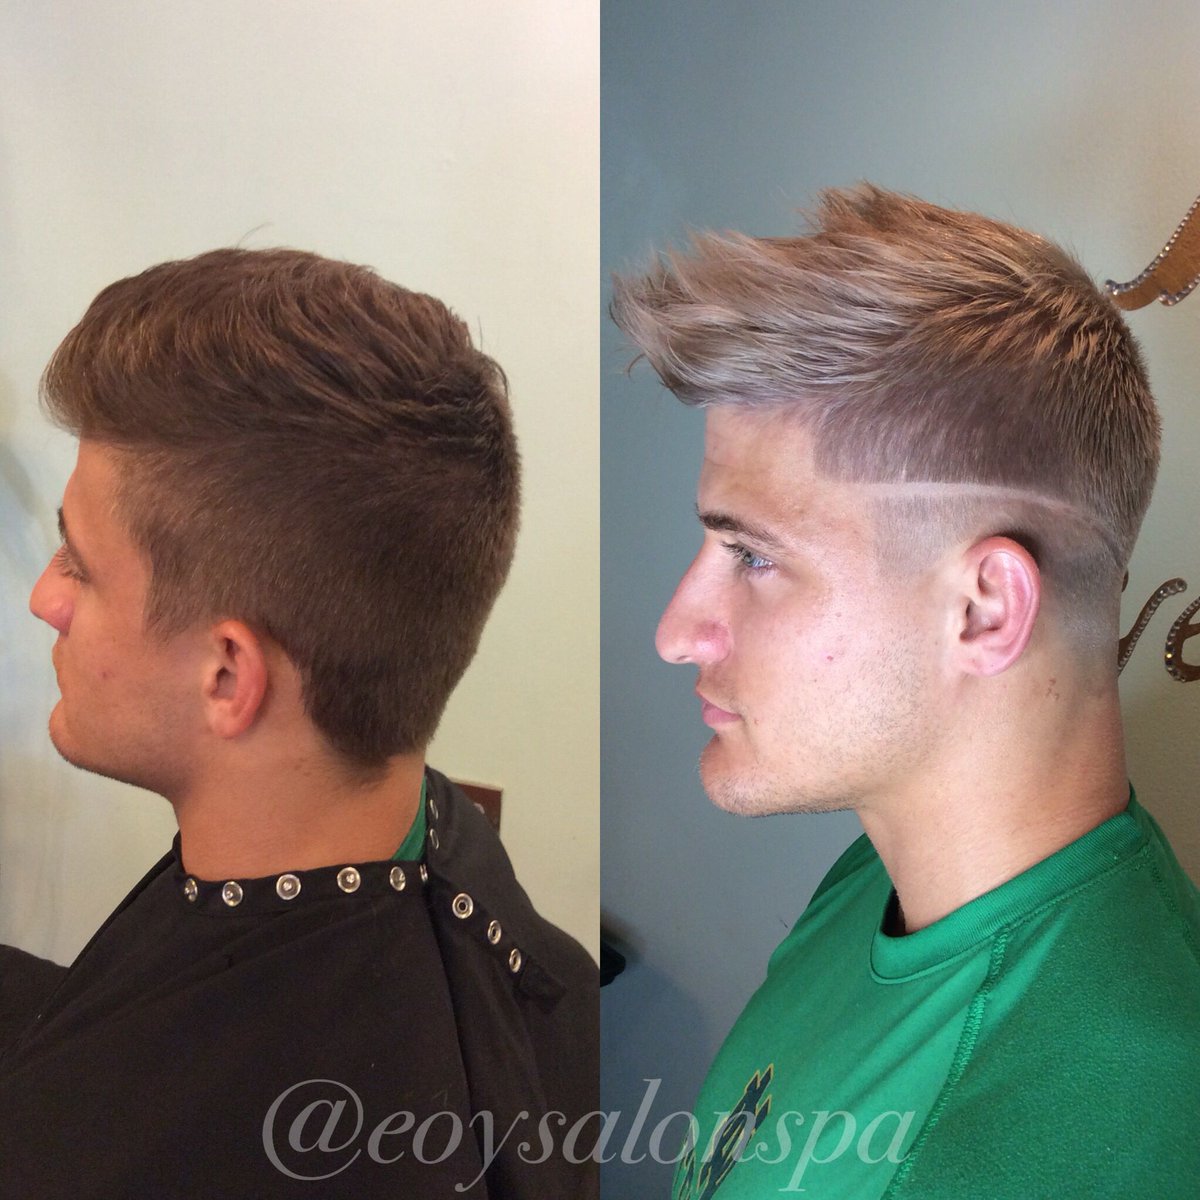 Yasss 🙌🏼 Men get their hair done too! Love this transformation done by our stylist Amber! 😍 #menscut #menscolor #fade #design #tampabarber #tampa #tampasalon #eoysalonspa #blondeice #behindthechair #americansalon